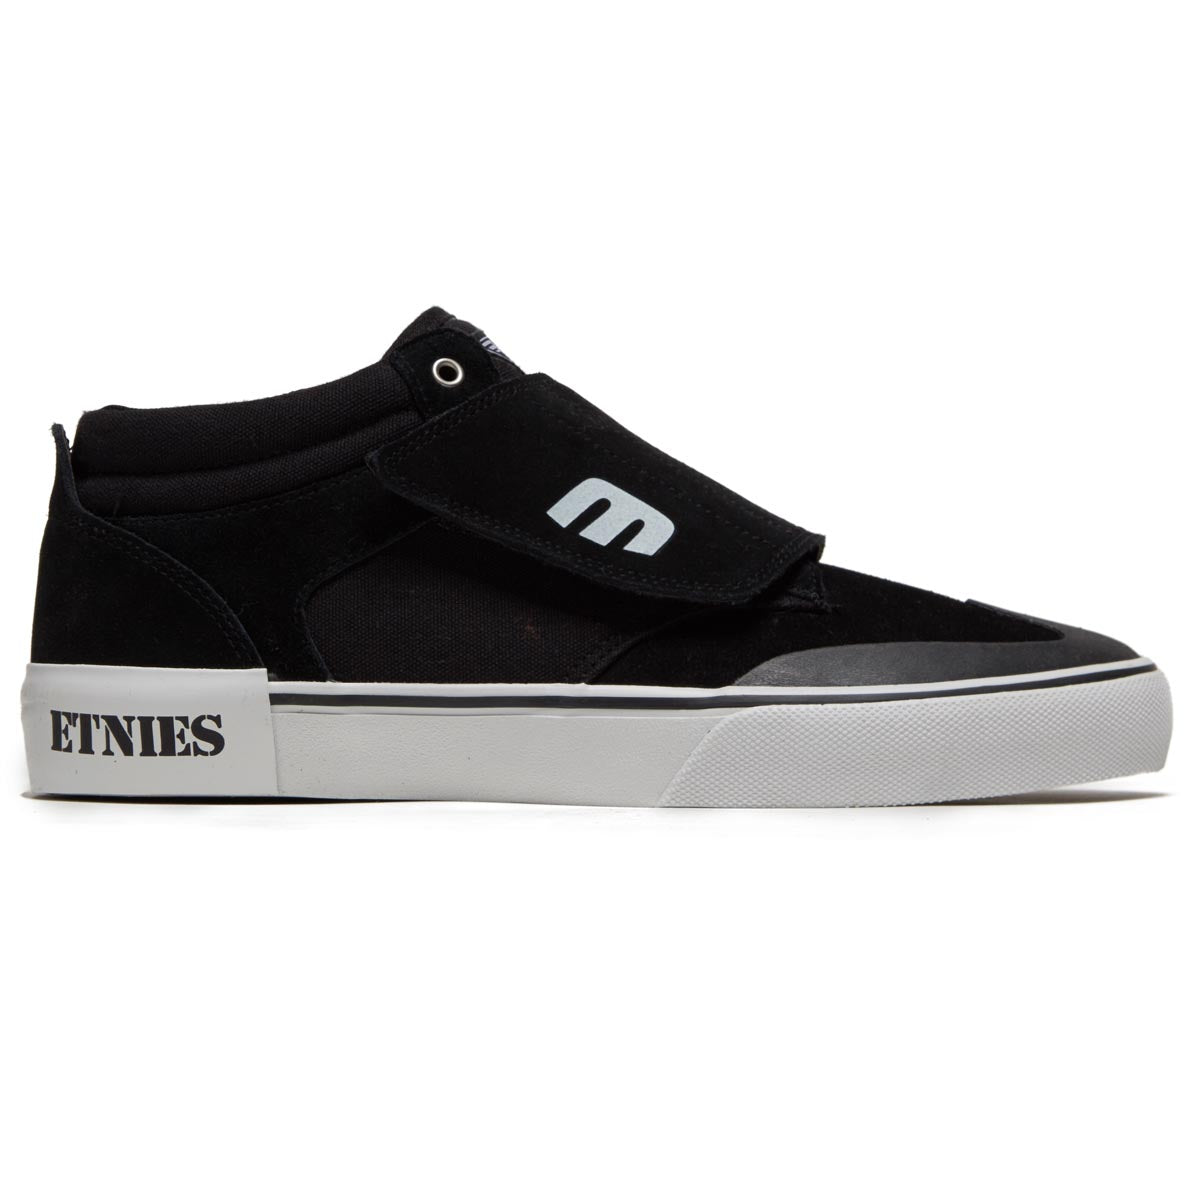 Etnies Andy Anderson Shoes - Black/White image 1